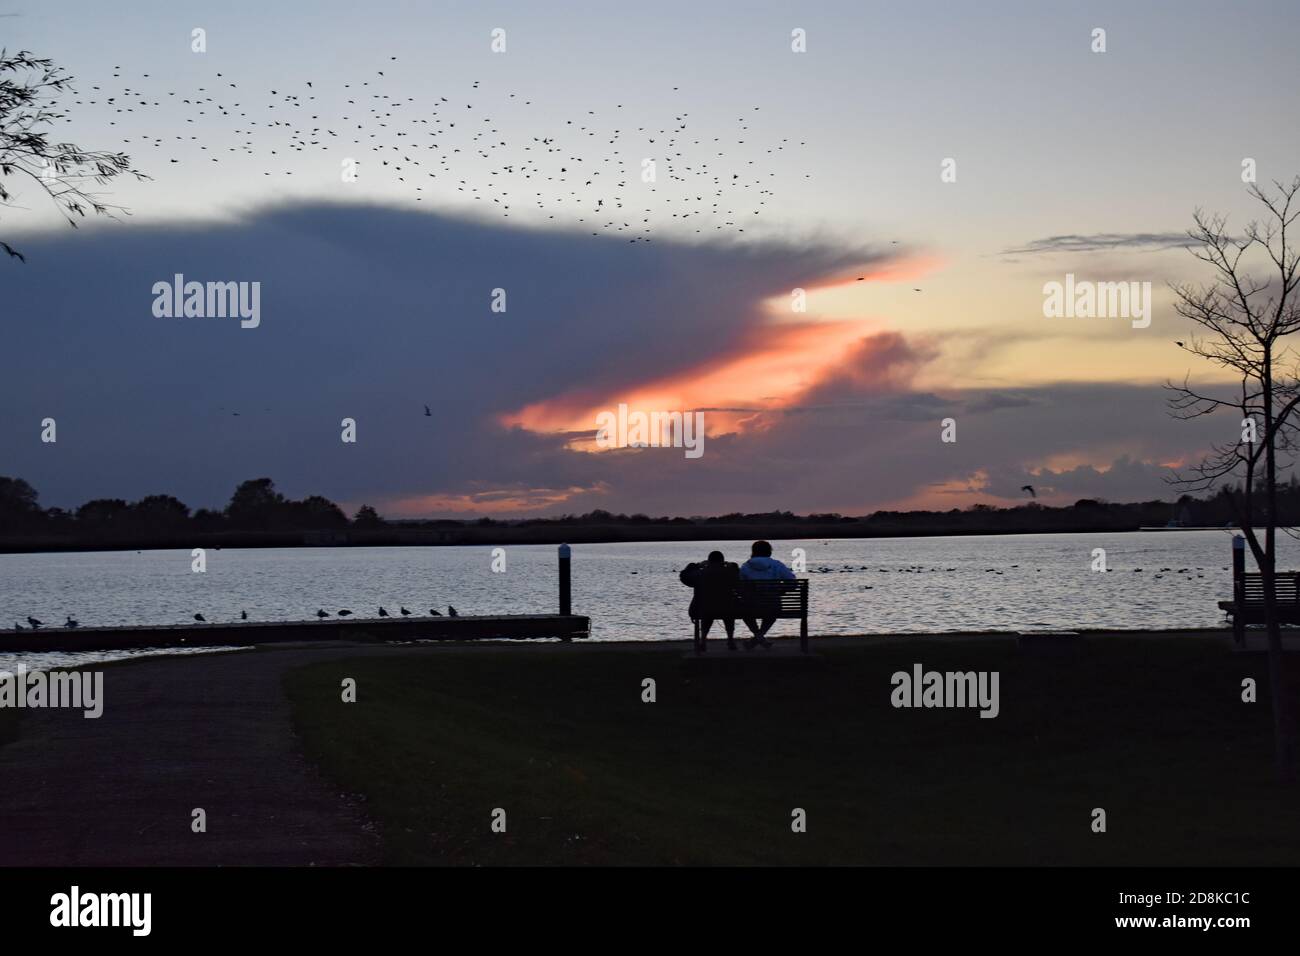 A couple sit on a bench watching the sunset at Oulton Broad near Lowestoft in The Broads National Park.  A flock of birds fly overhead. Stock Photo